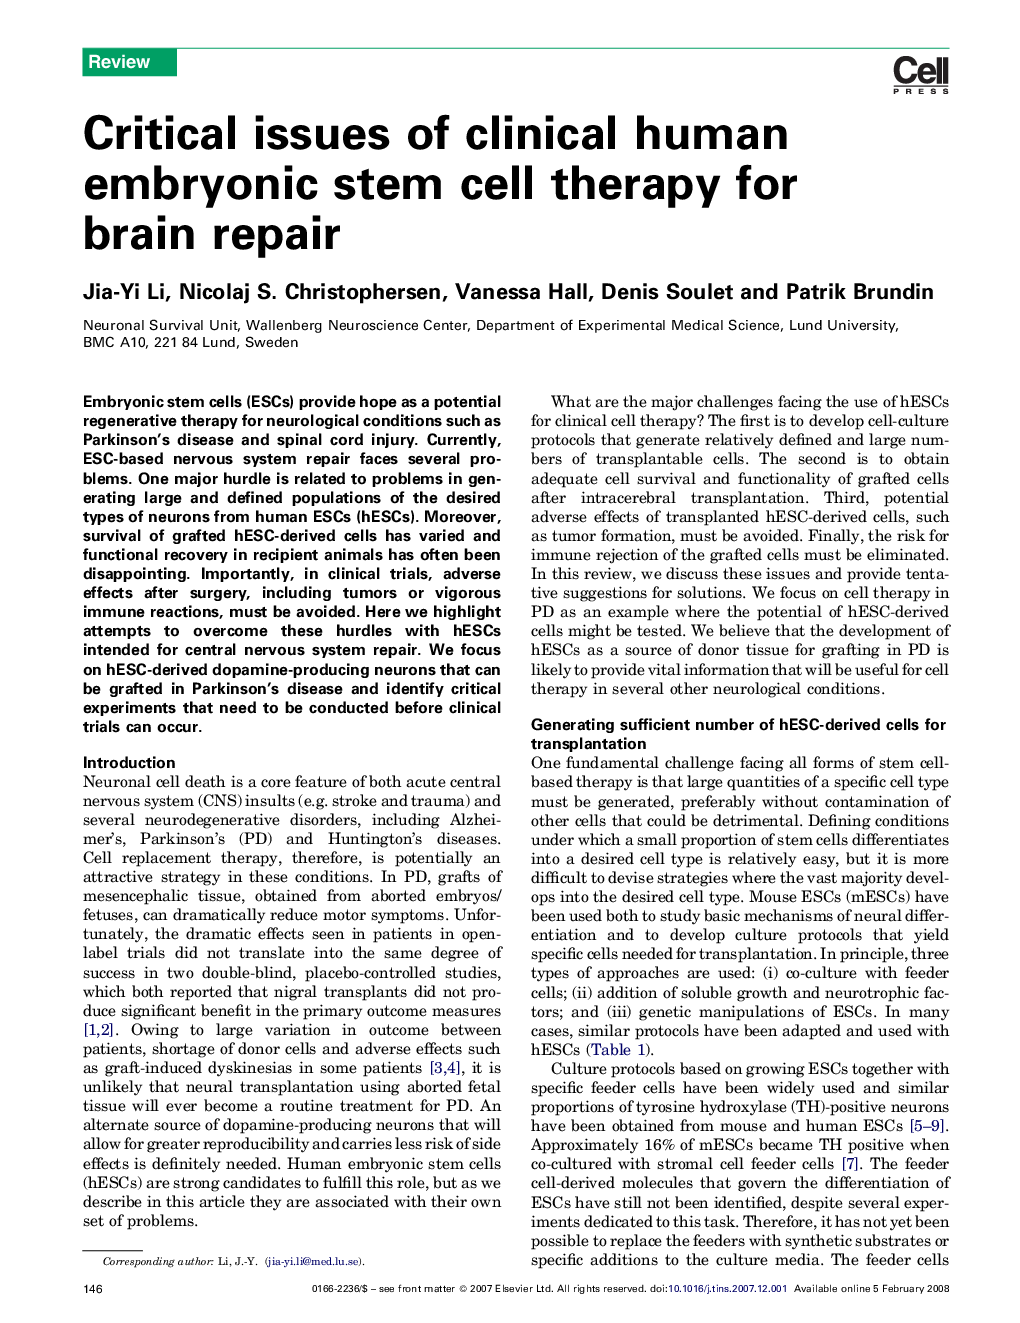 Critical issues of clinical human embryonic stem cell therapy for brain repair